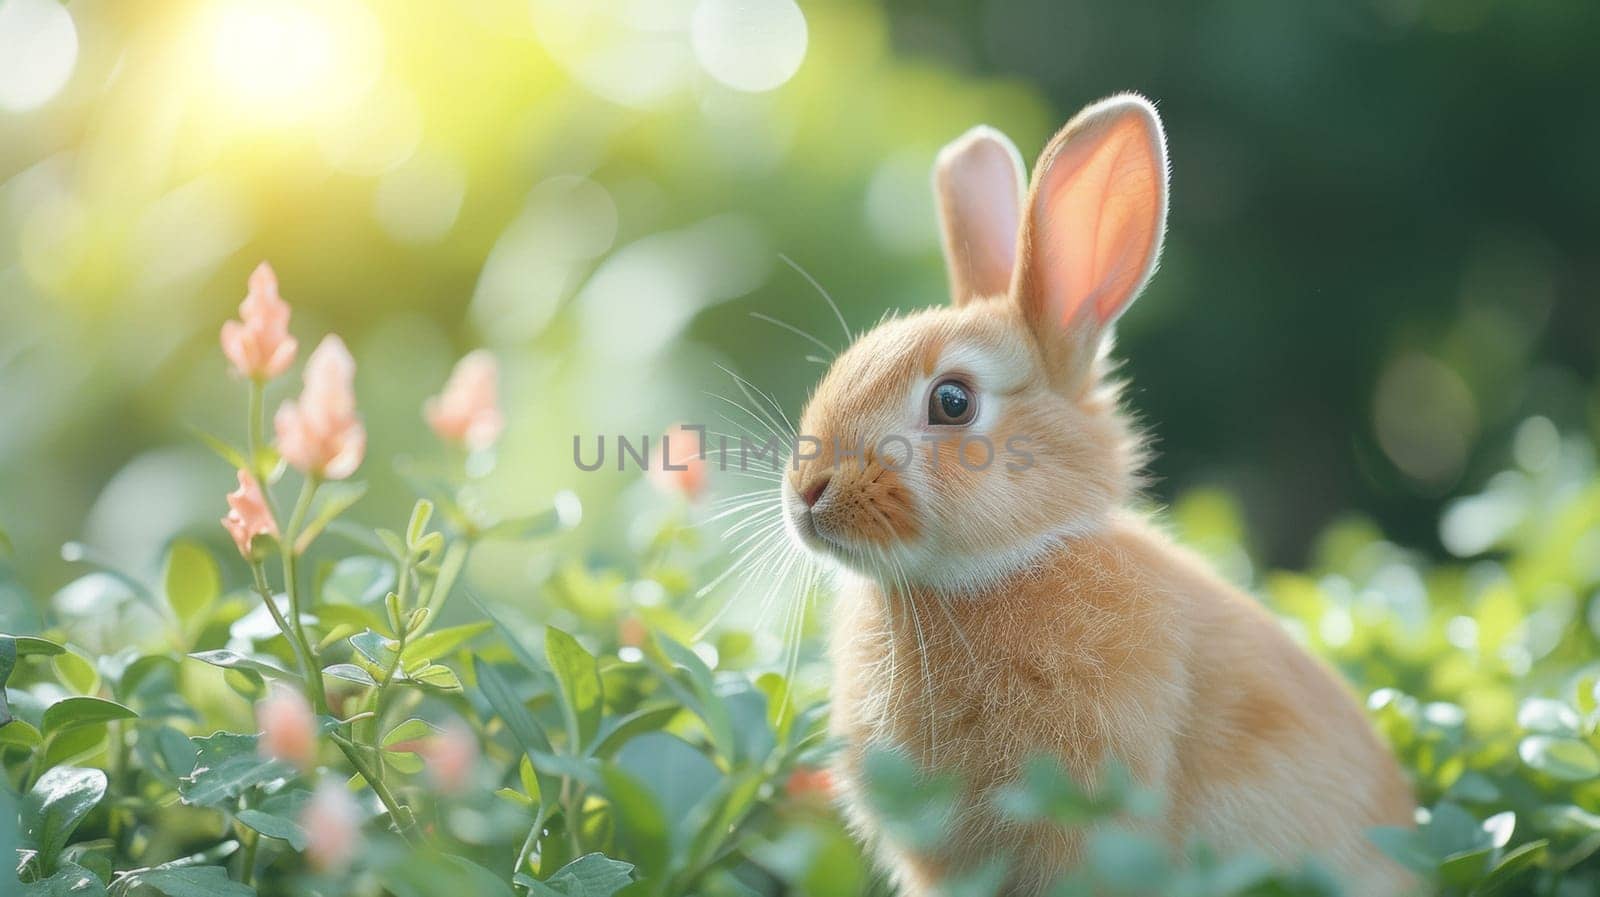 A small rabbit sitting in a field of flowers with green grass, AI by starush